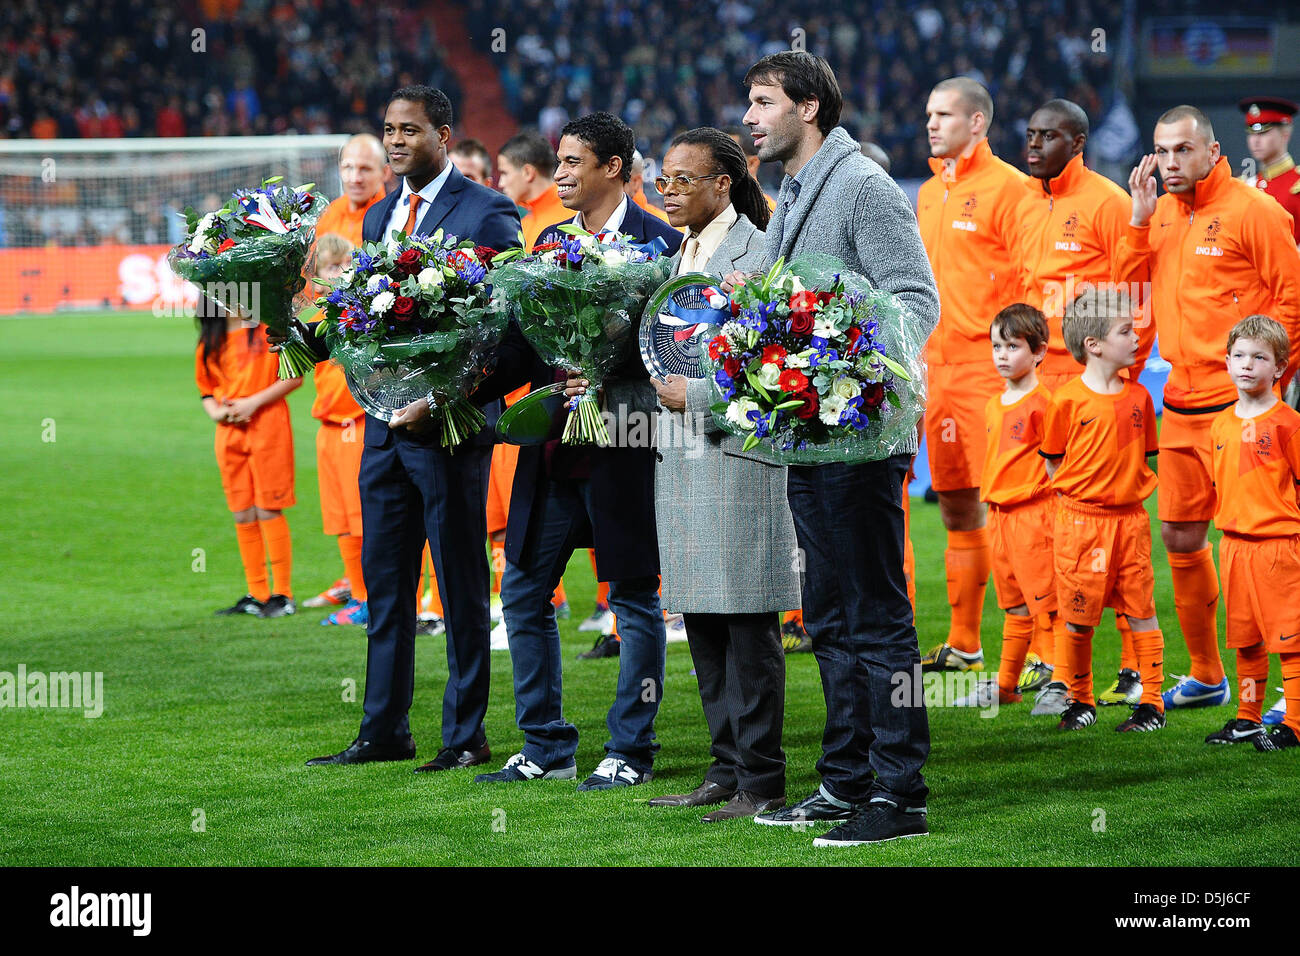 Assistand coach Patrick Kluivert (L-R), Alex Reizinger, Edgar Davids and Ruud van Nistelrooy are honored by the KNVB during the international match between the Netherlands and Germany at Amsterdam ArenA in Amsterdam, The Netherlands, 14 November 2012. Photo: Revierfoto Stock Photo